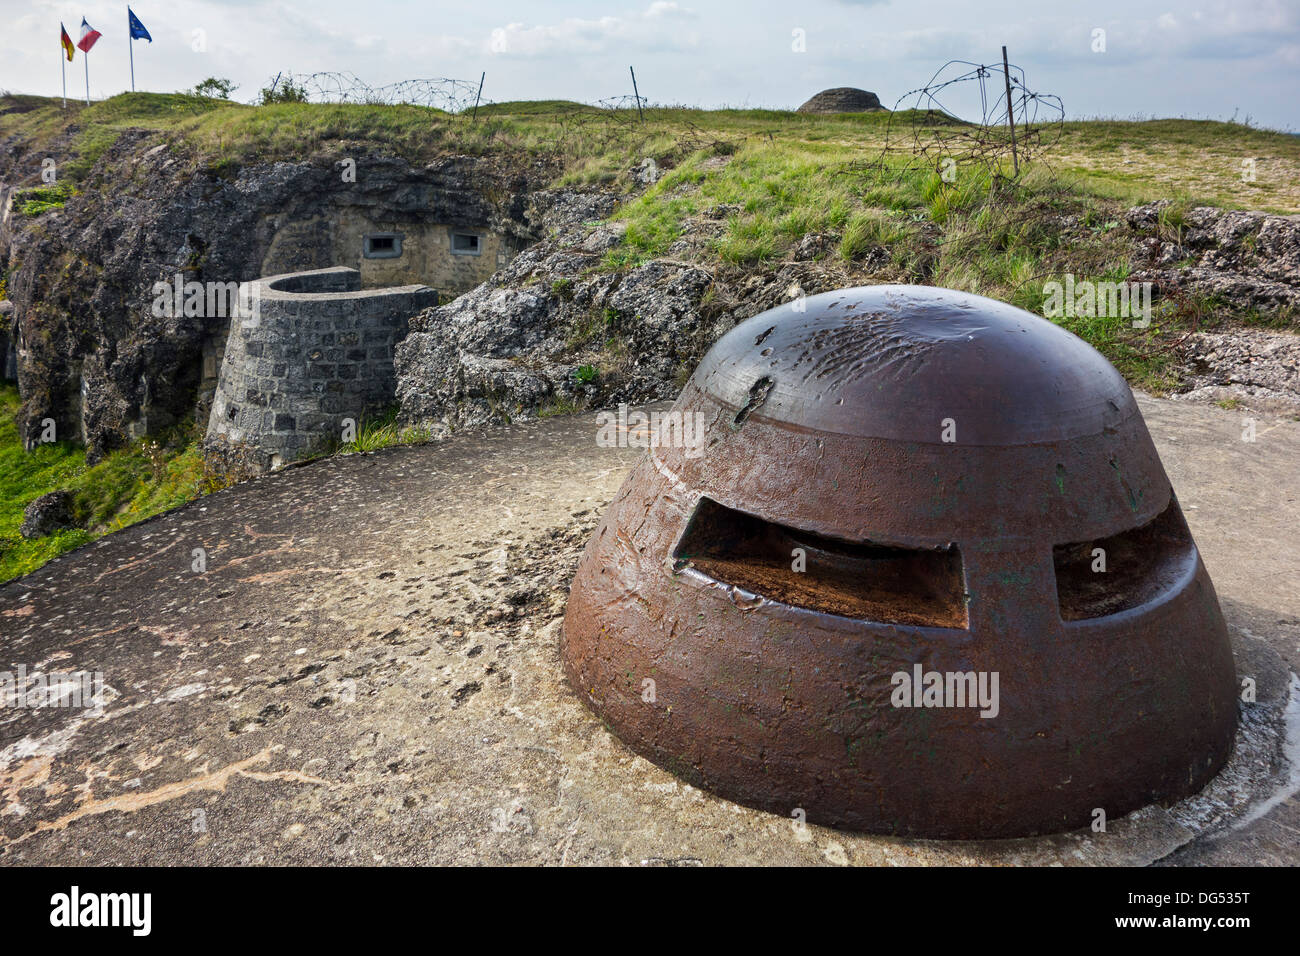 Armoured observation turret / cupola of the First World War One Fort de Douaumont, Lorraine, Battle of Verdun, Argonne, France Stock Photo